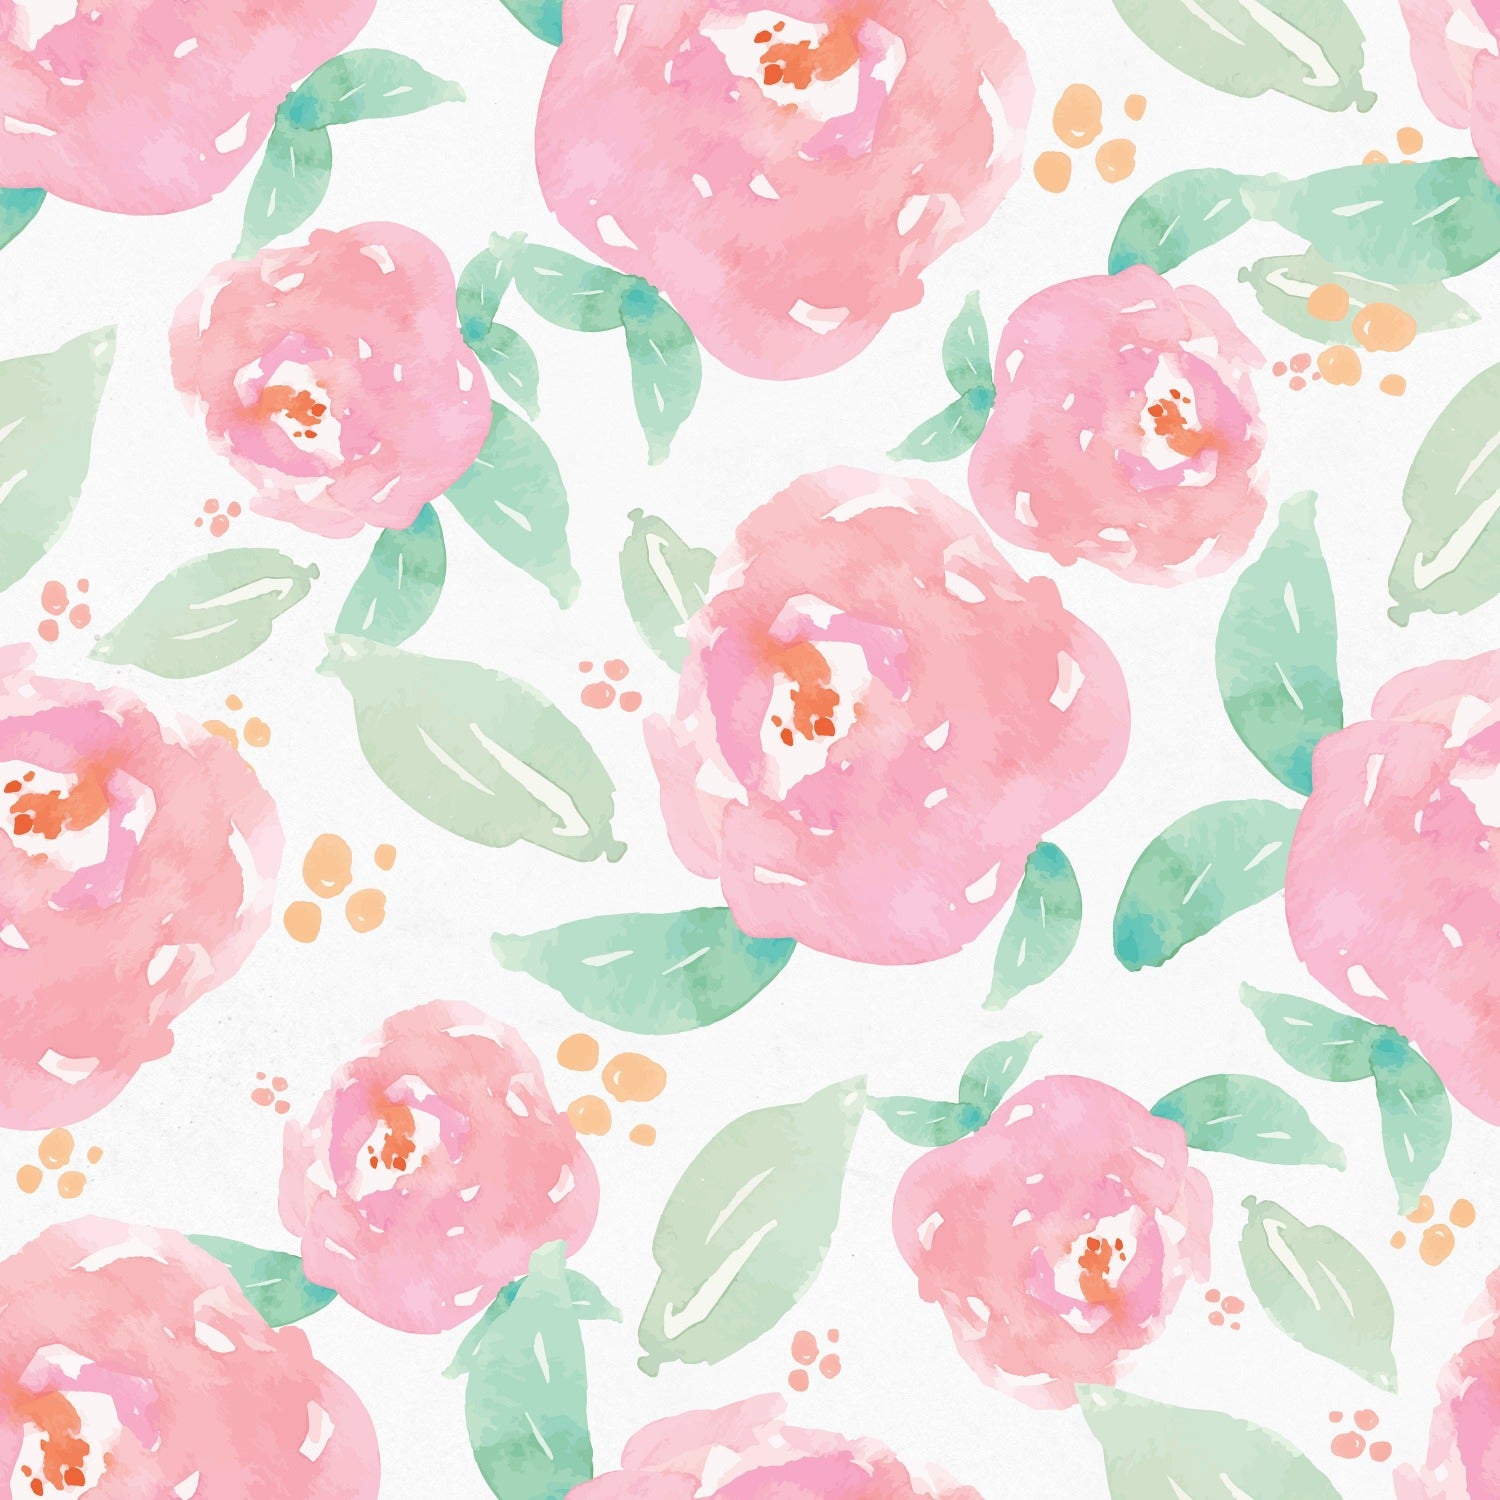 Seamless pattern of bright nursery floral wallpaper with soft pink peonies and scattered green leaves